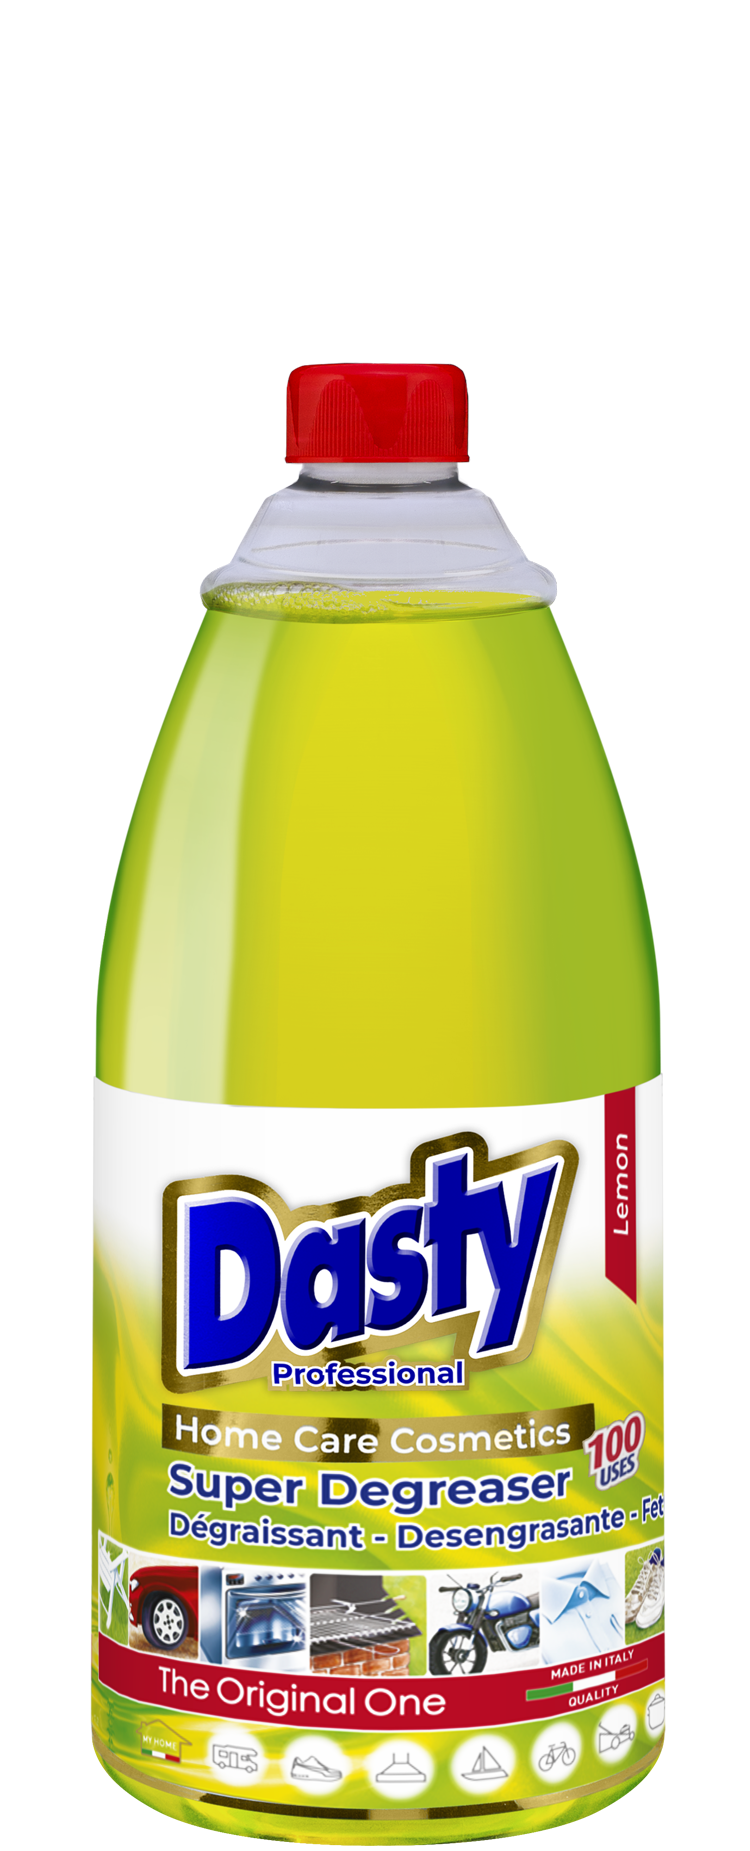 Les solutions Dasty - Dasty